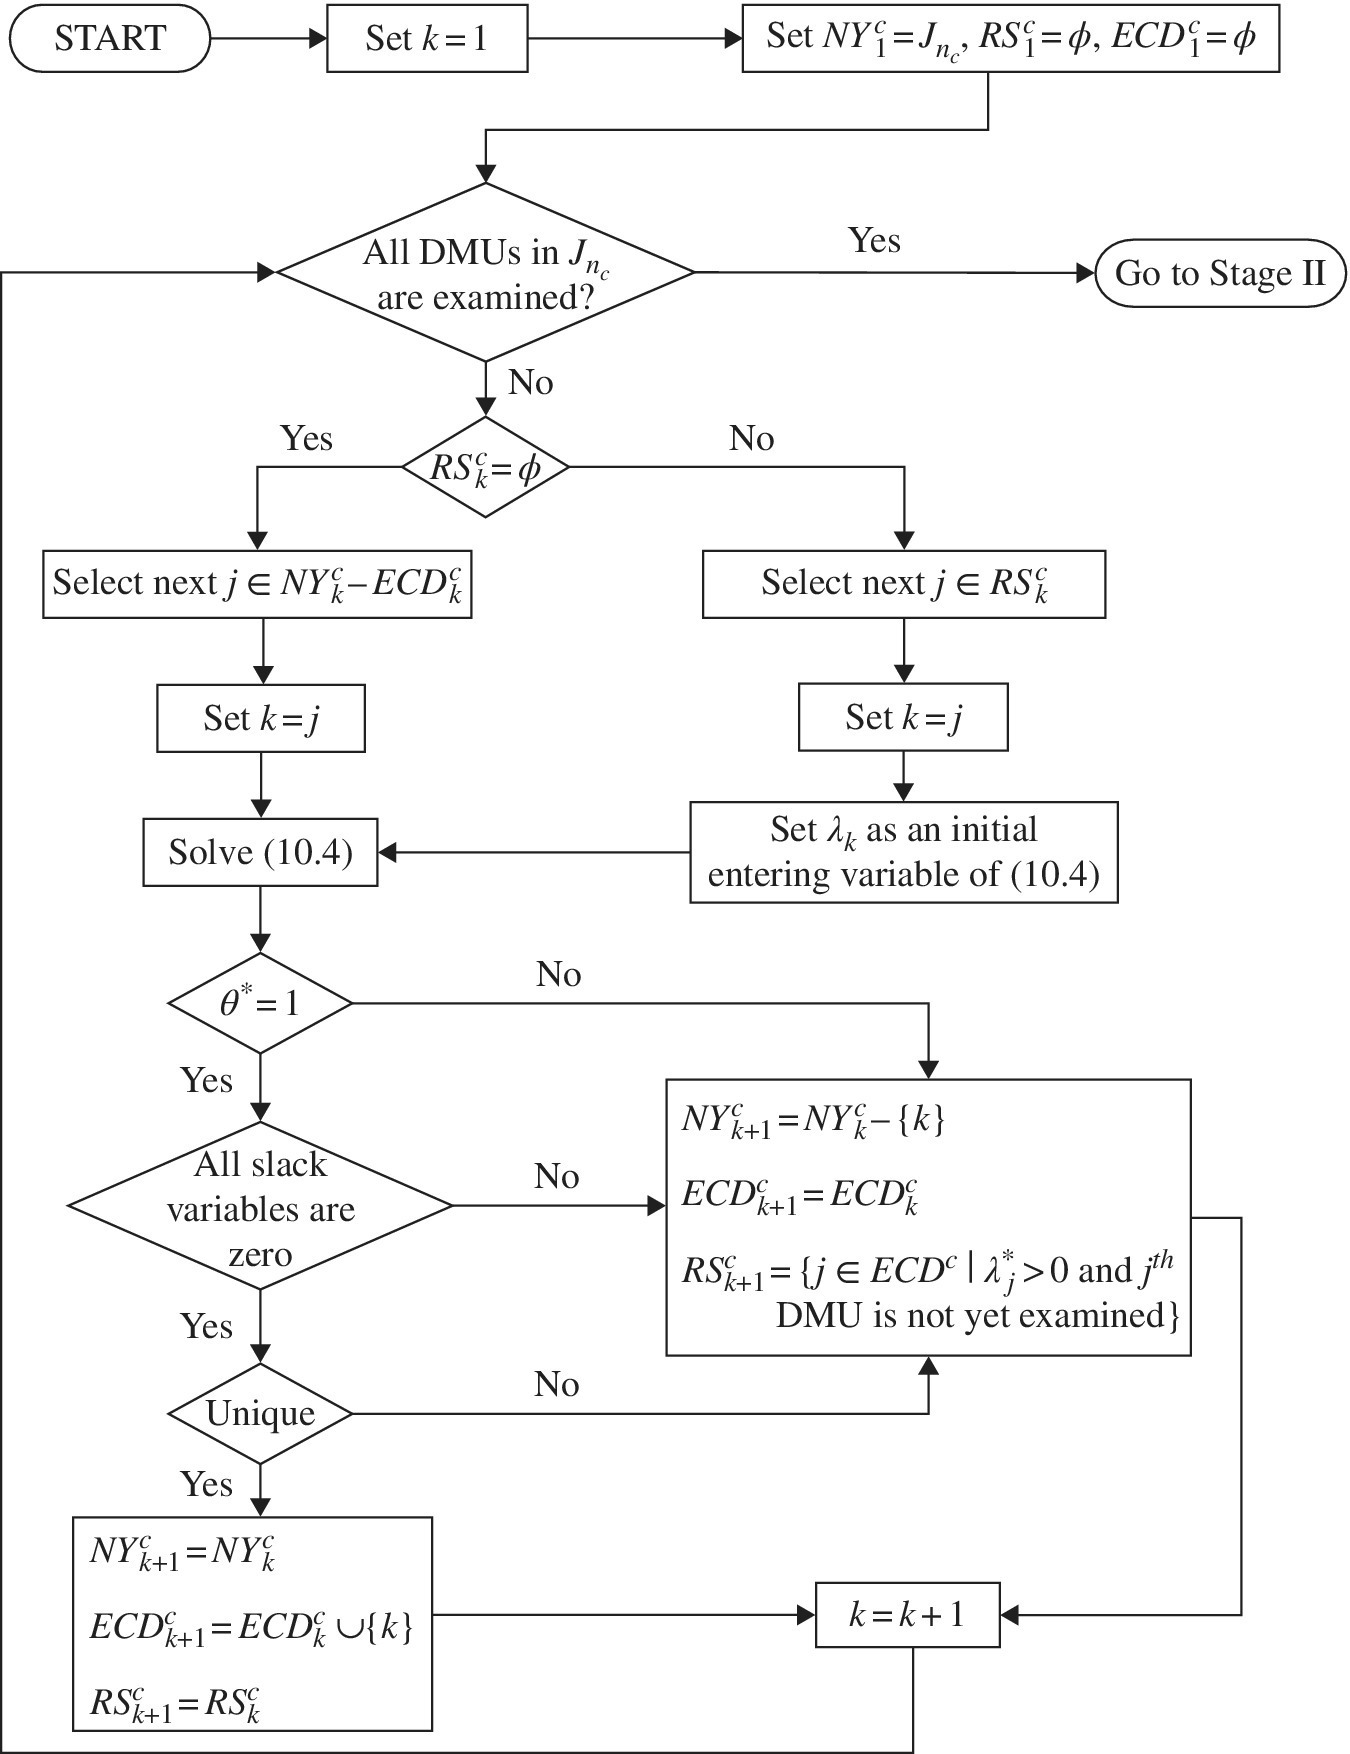 Algorithm depicting a detailed outline regarding Stage I. Start box branches to “Set k = 1” to “Set NYc1=Jnc, RSc1= ϕ, ECDc1 = ϕ”, to “All DMUs in Jnc are examined?”, and so on.